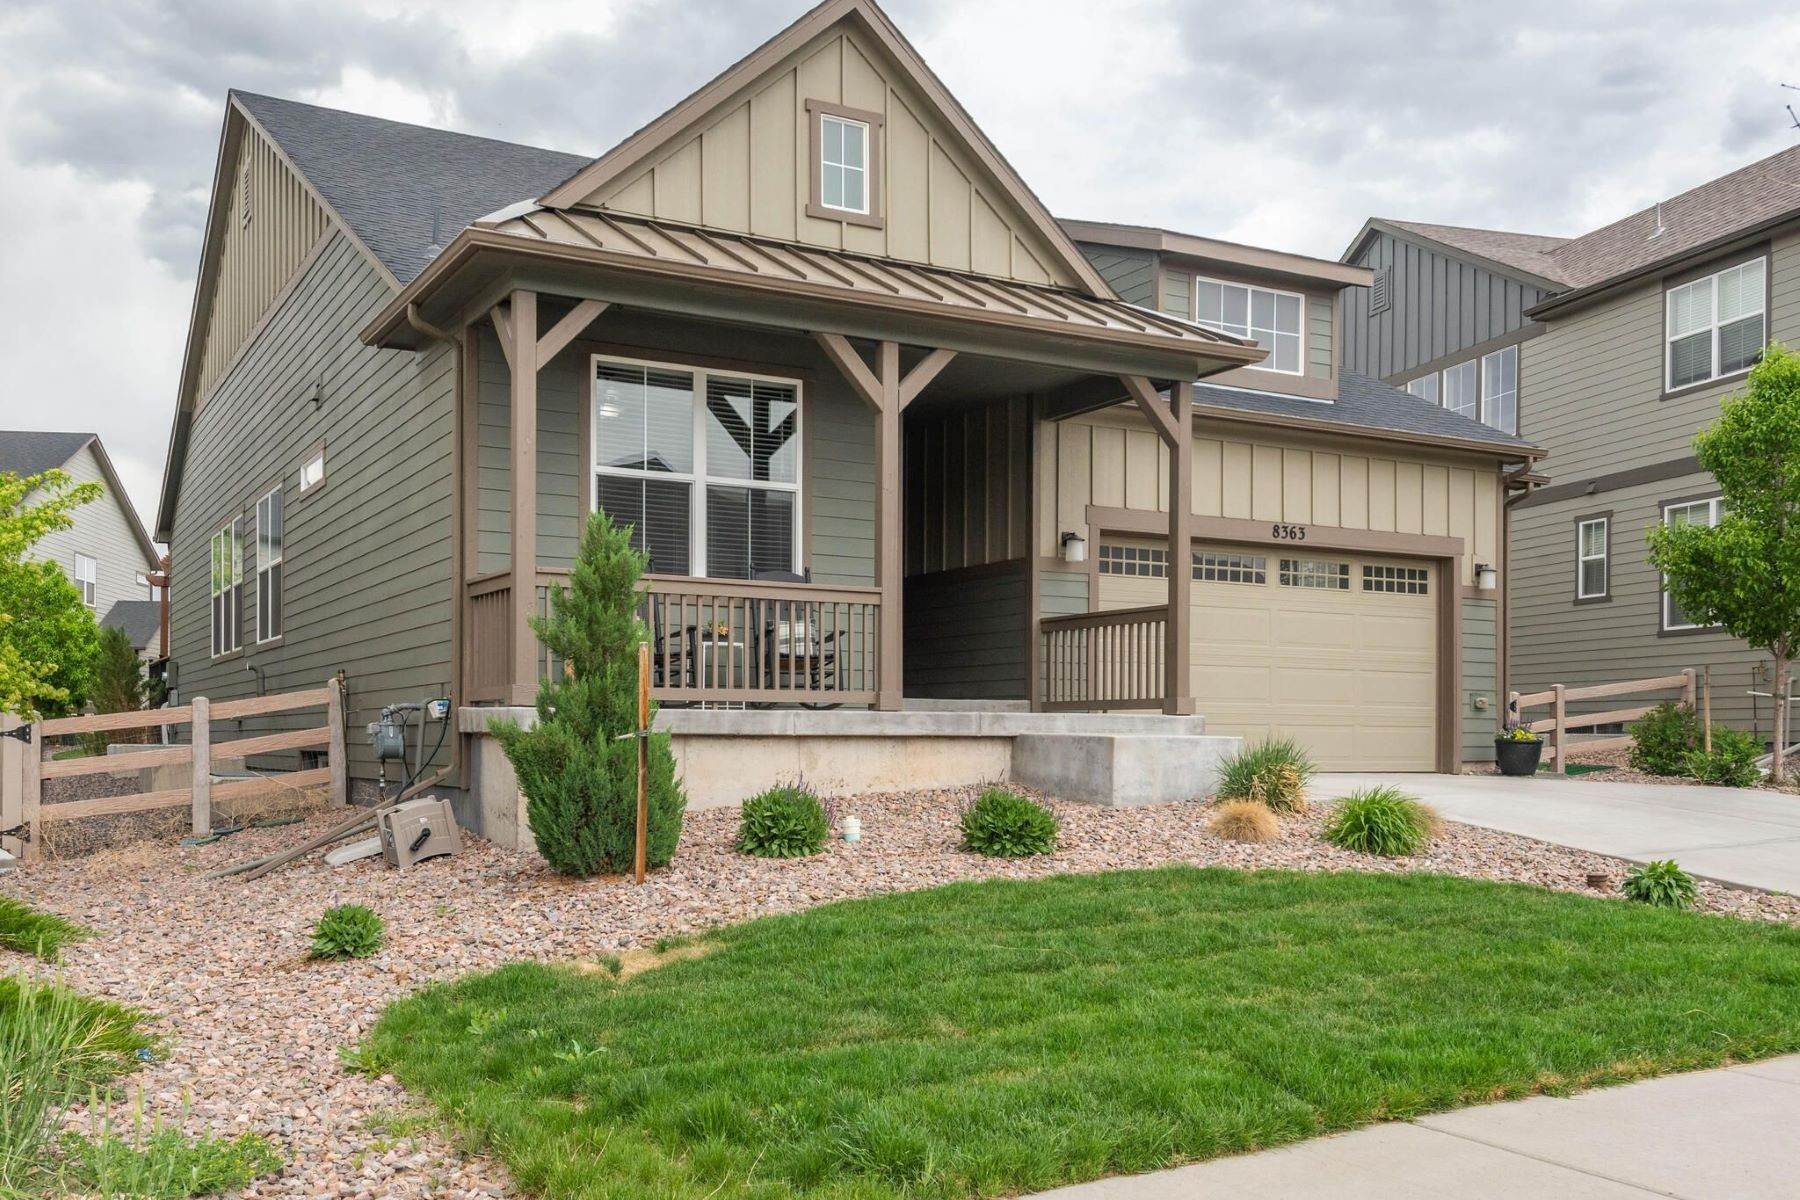 37. Single Family Homes for Active at 8363 Garden City Avenue, Littleton, CO, 80125 8363 Garden City Avenue Littleton, Colorado 80125 United States